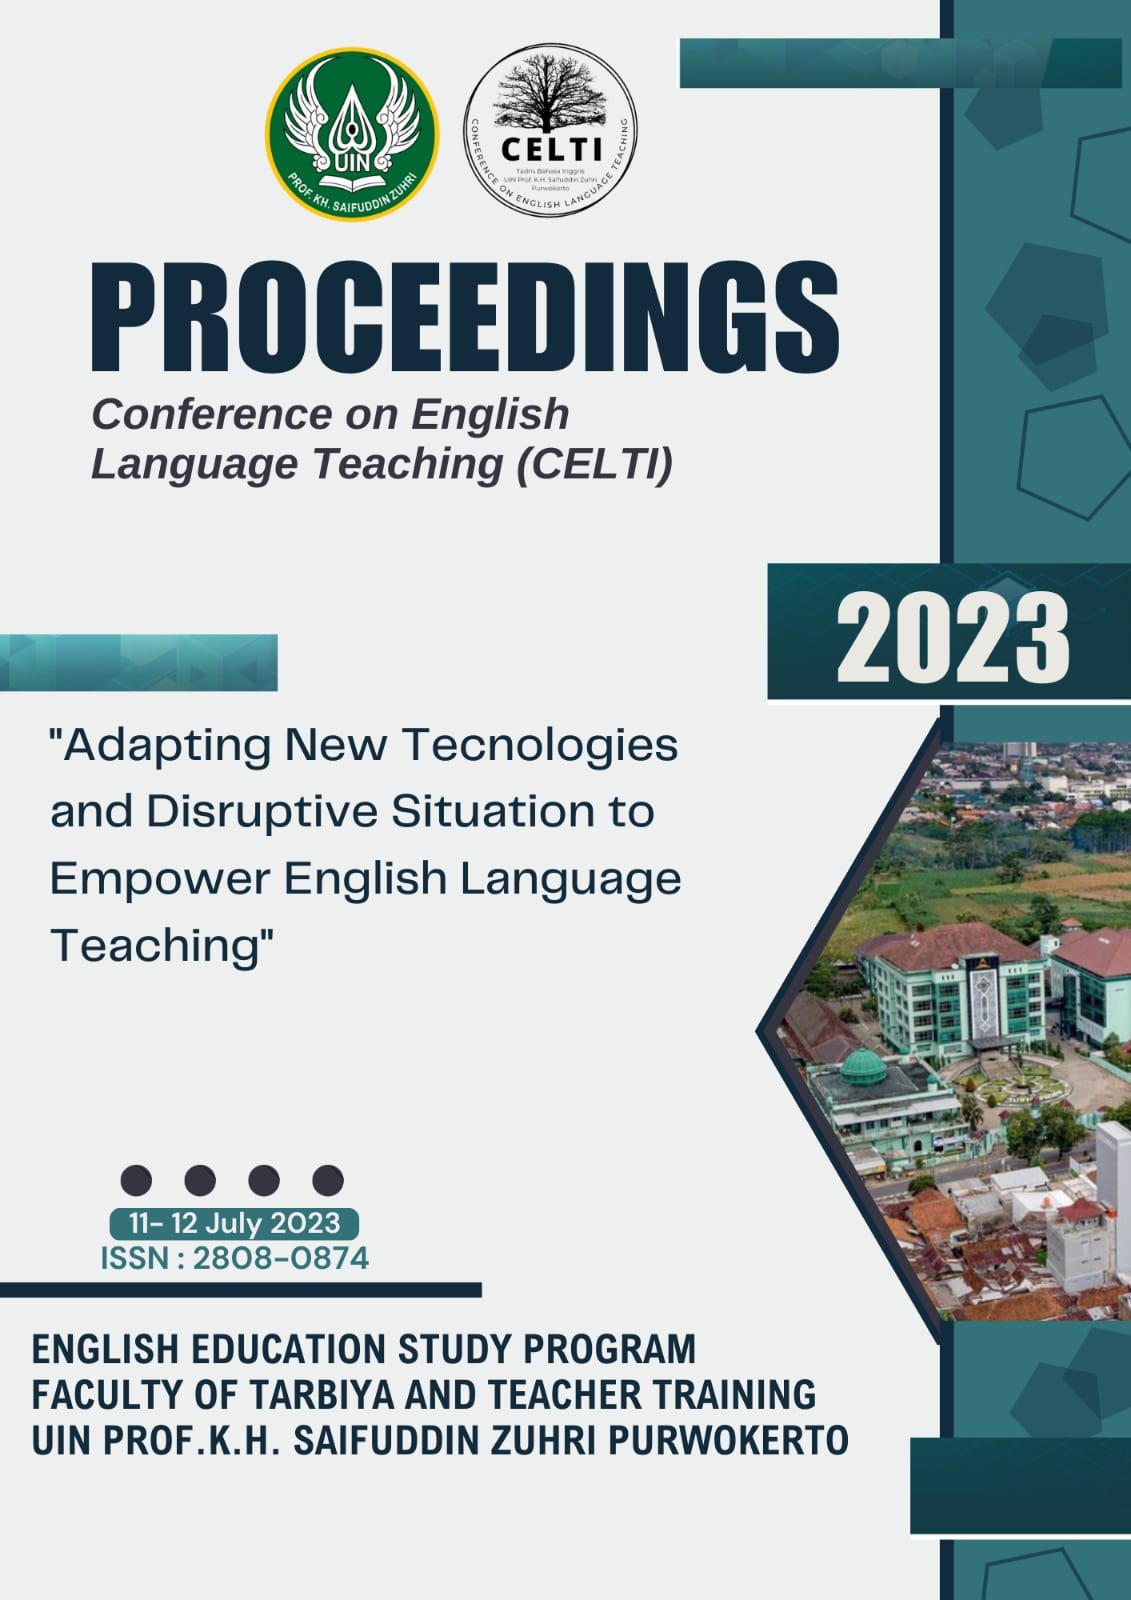                     View 2023: Embracing Changes: Adapting New Technologies and Disruptive Situations to Empower English Language Teaching
                